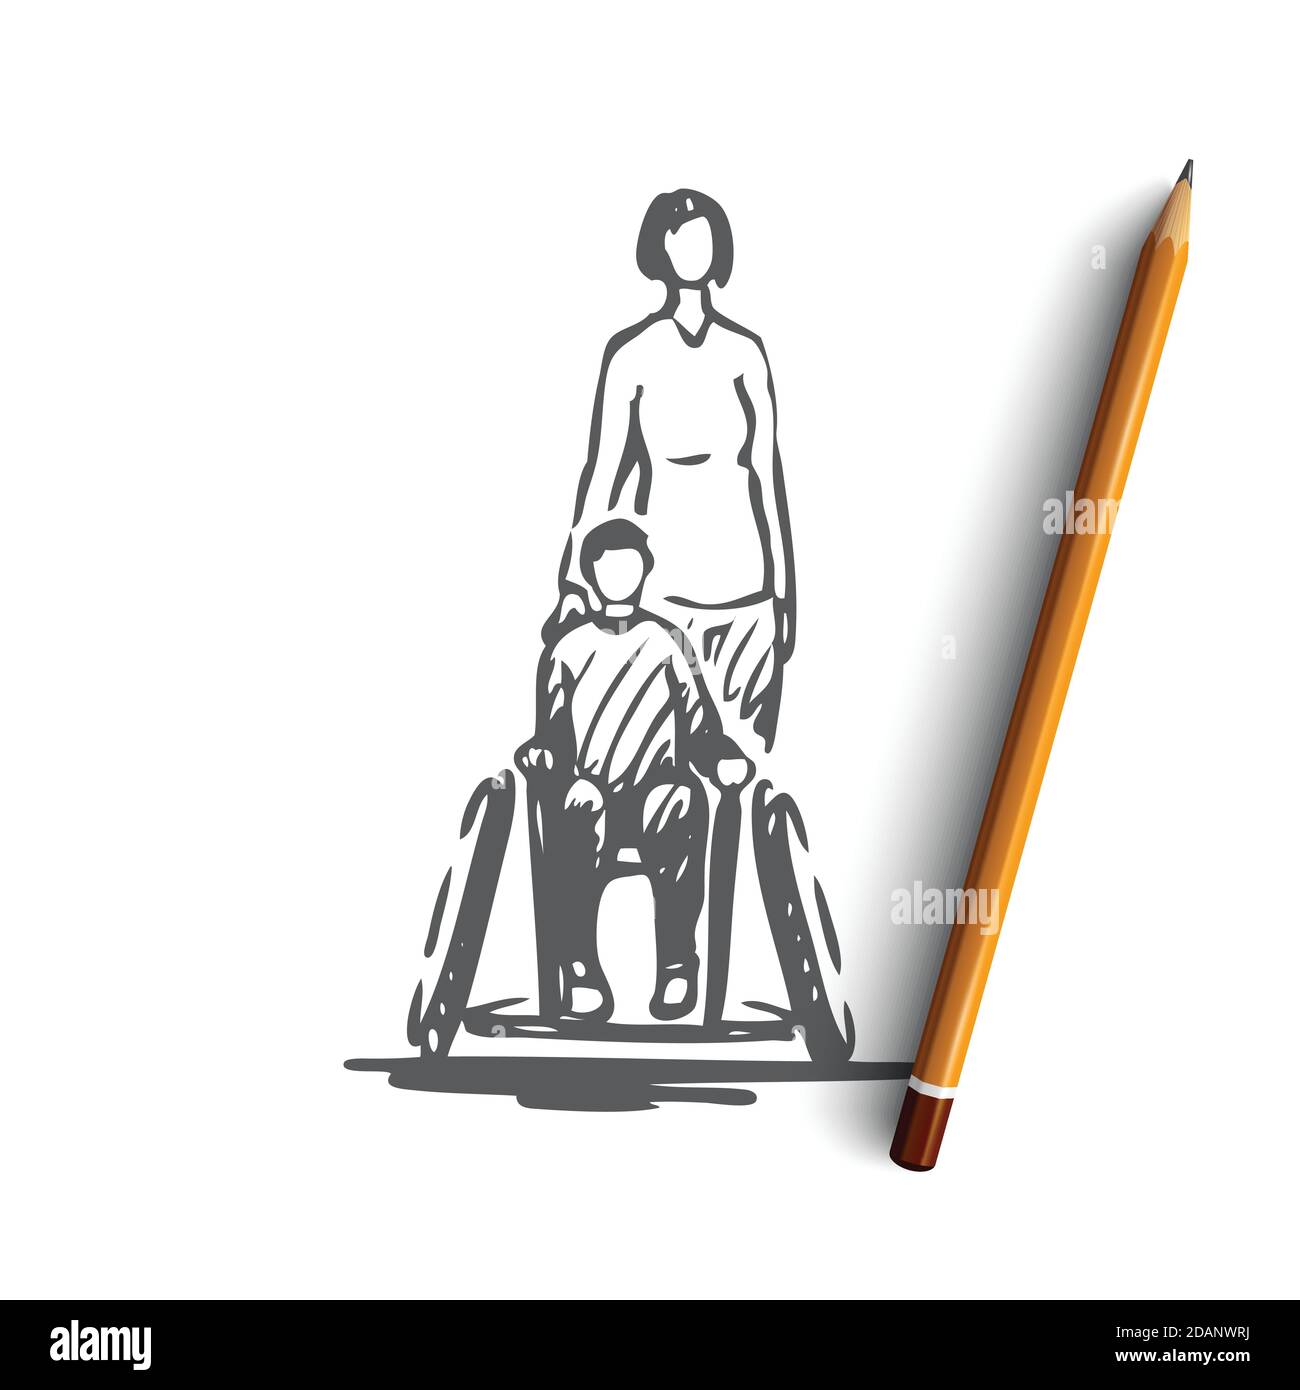 Child, disabled, wheelchair, health, medical concept. Hand drawn isolated vector. Stock Vector